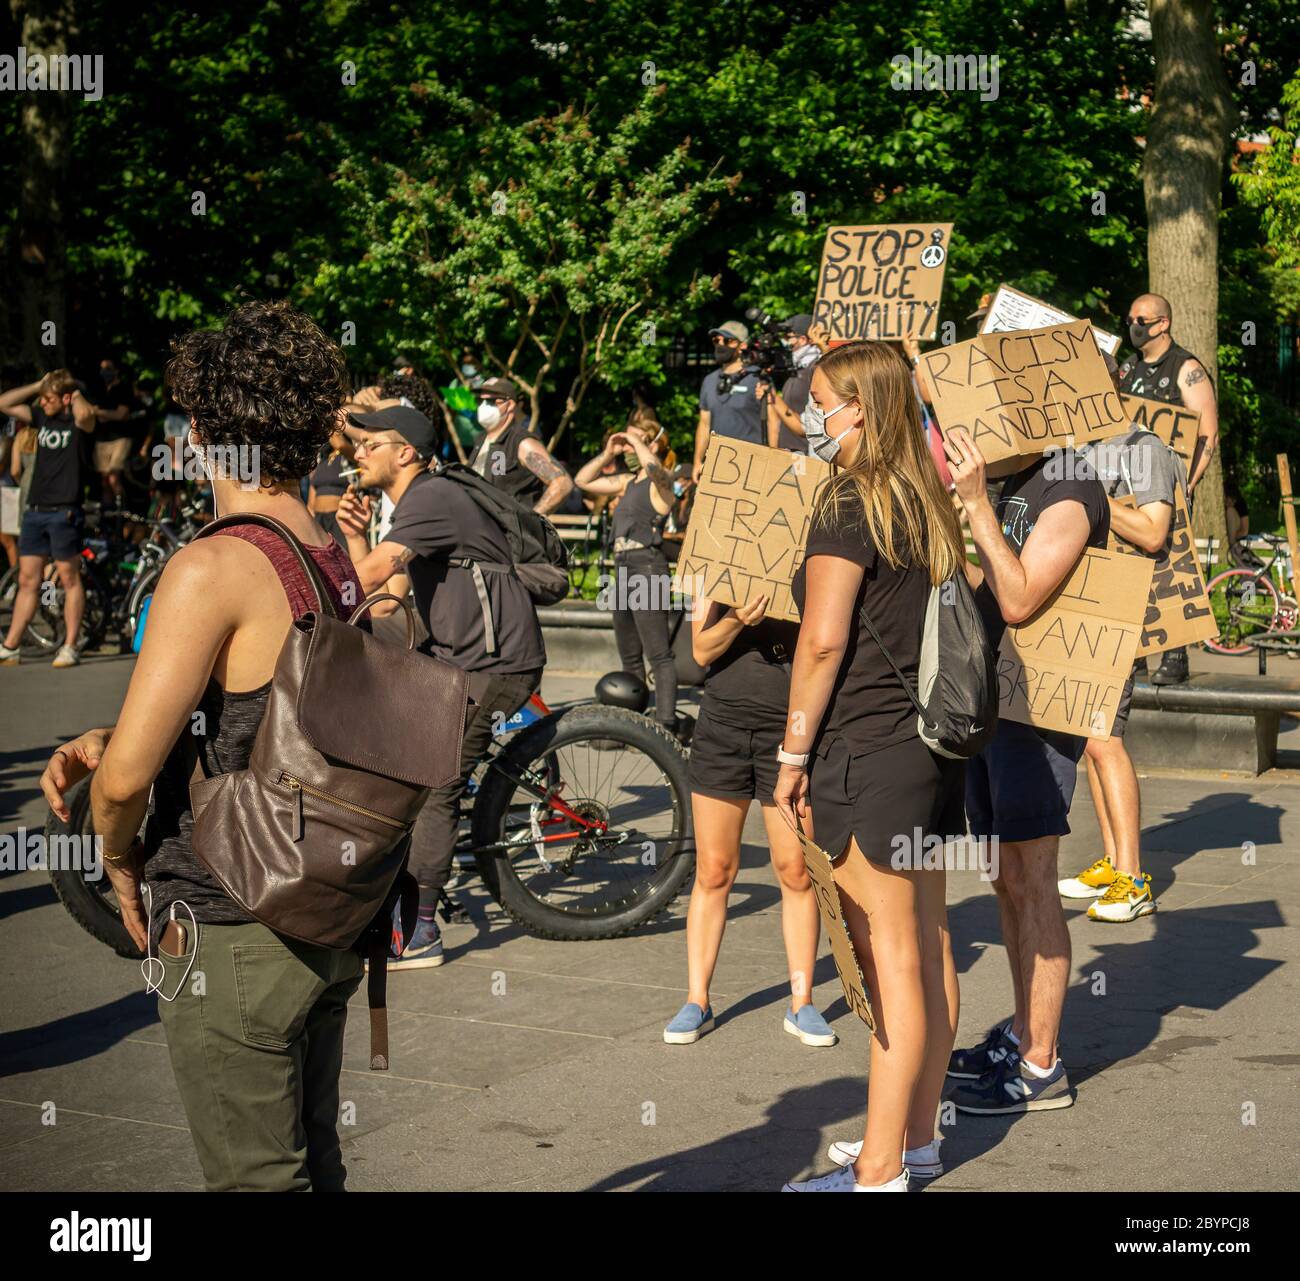 Black Lives Matter demonstrators rally, prior to marching, in Washington Square Park in New York protesting the death of George Floyd, seen on Tuesday, June 9, 2020. (© Richard B. Levine) Stock Photo